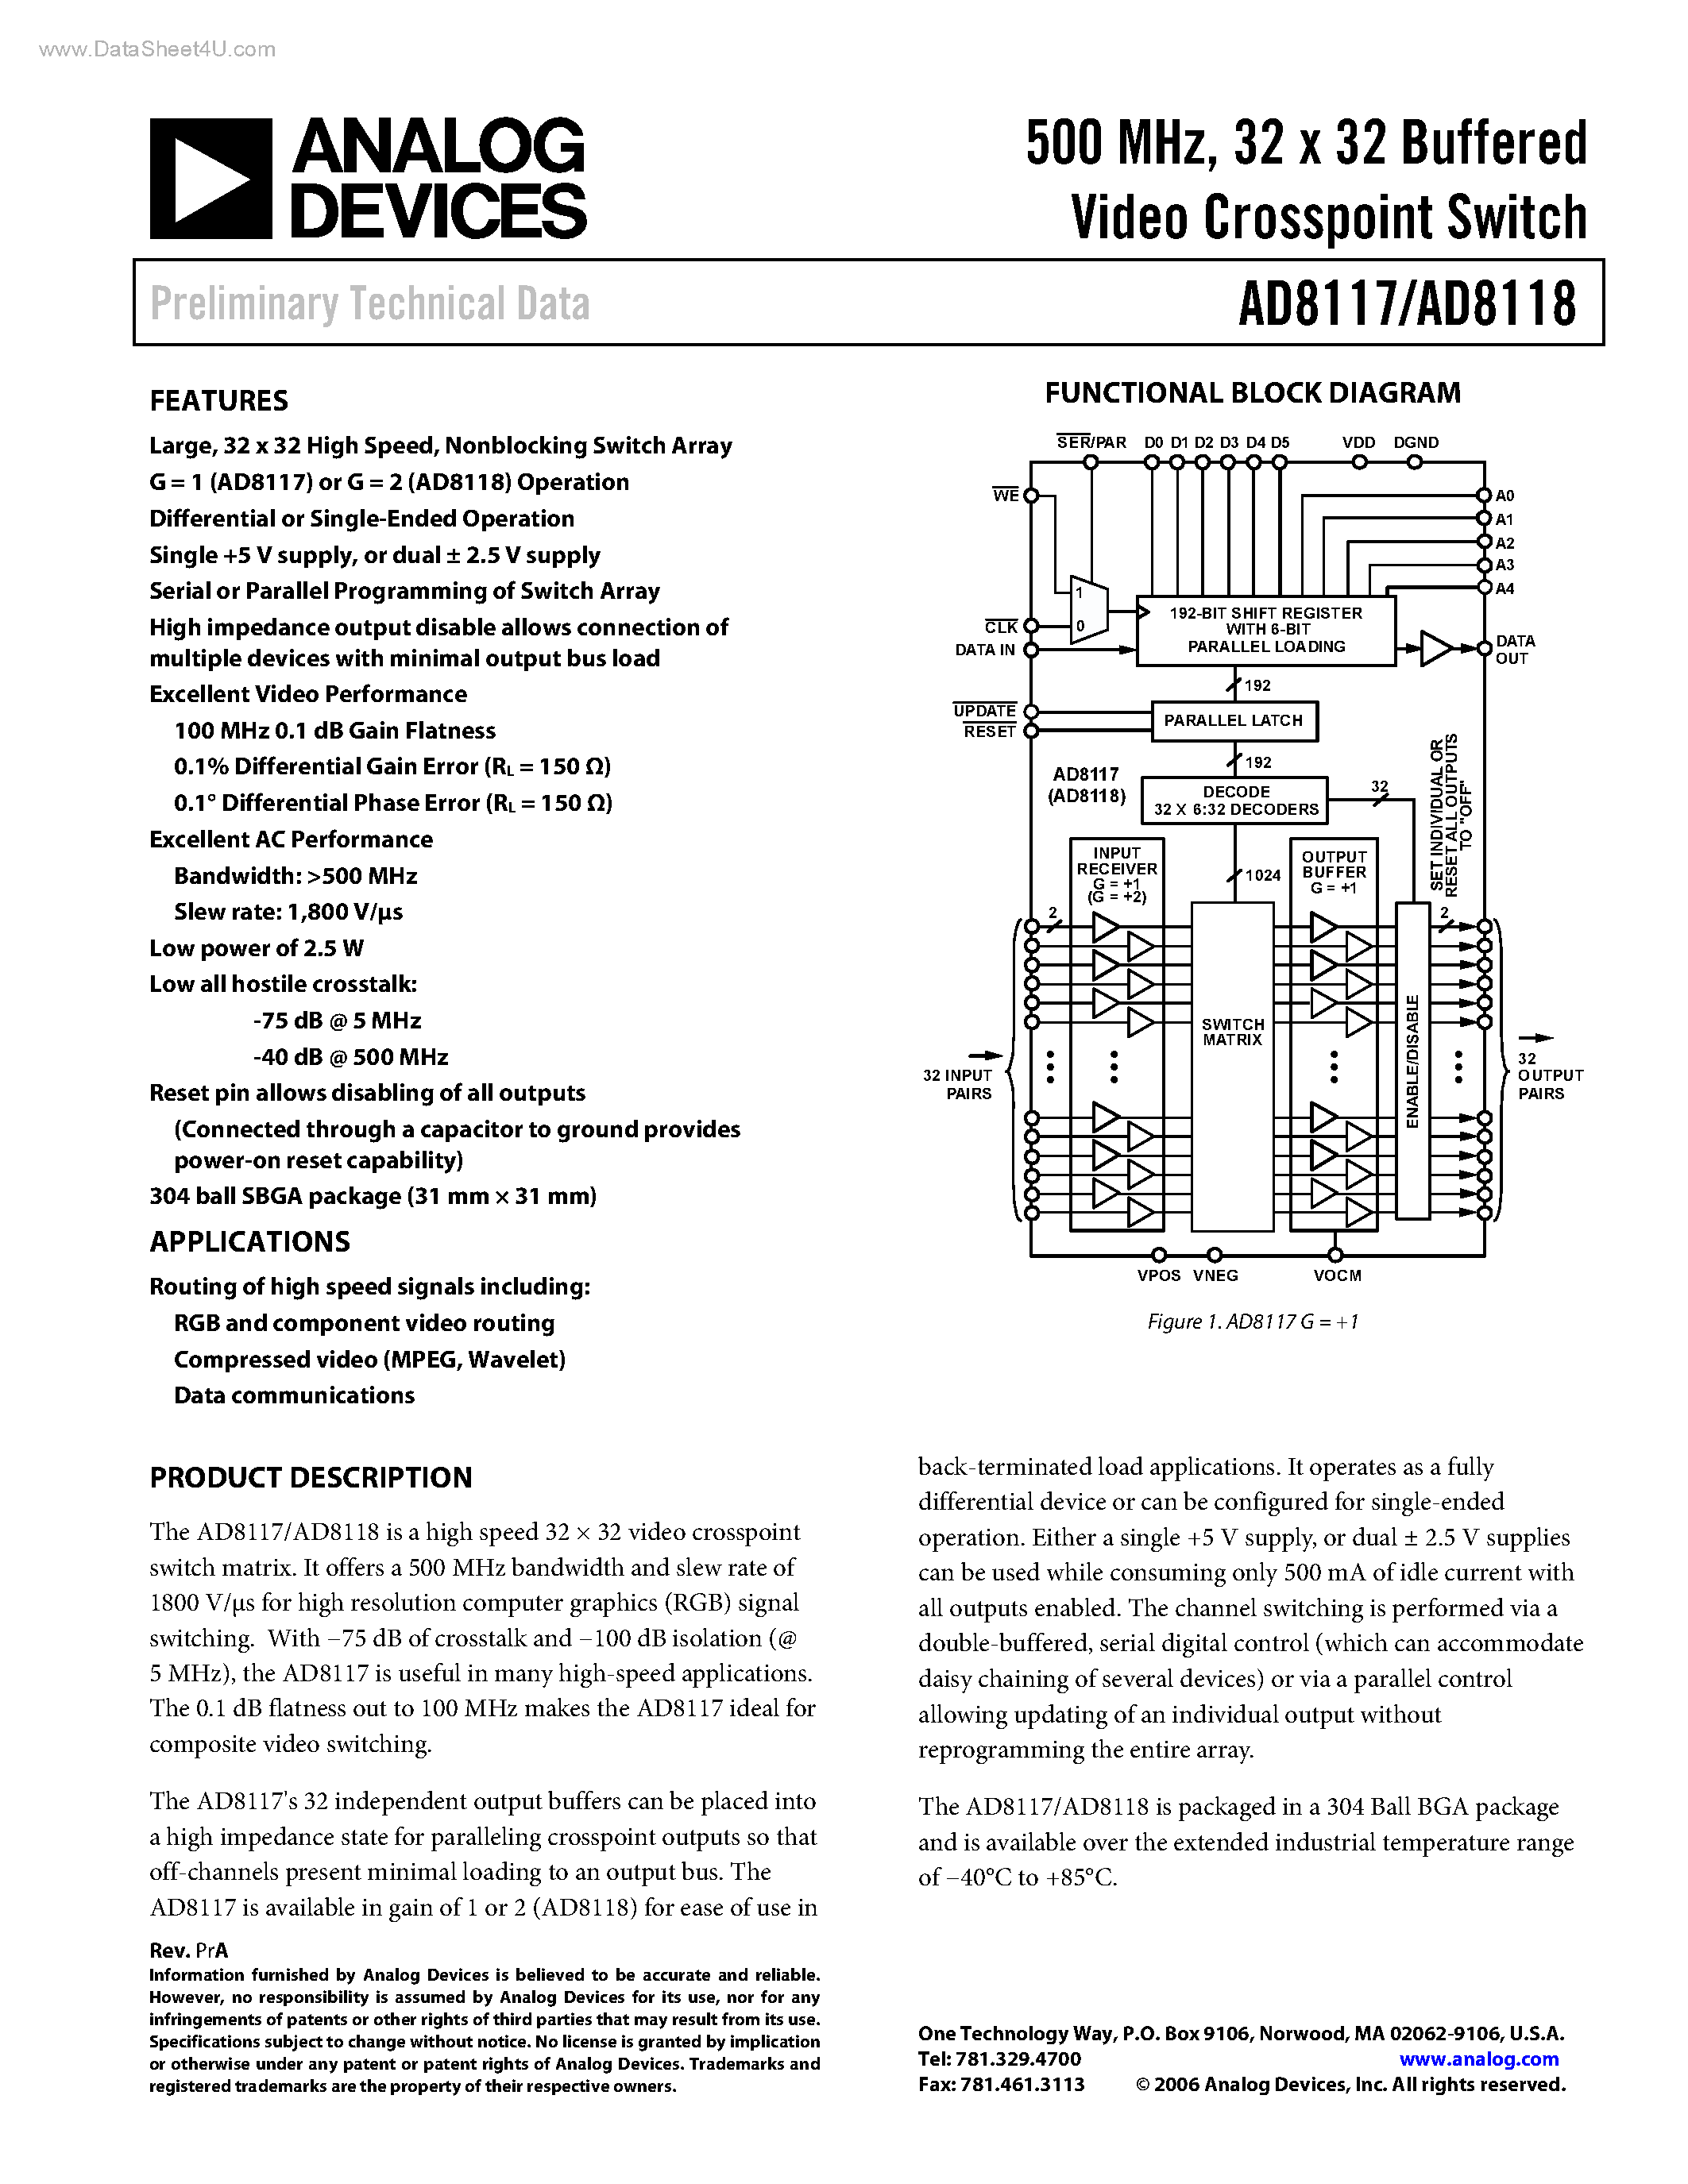 Datasheet AD8117 - (AD8117 / AD8118) Video Crosspoint Switch Video Crosspoint Switch page 1